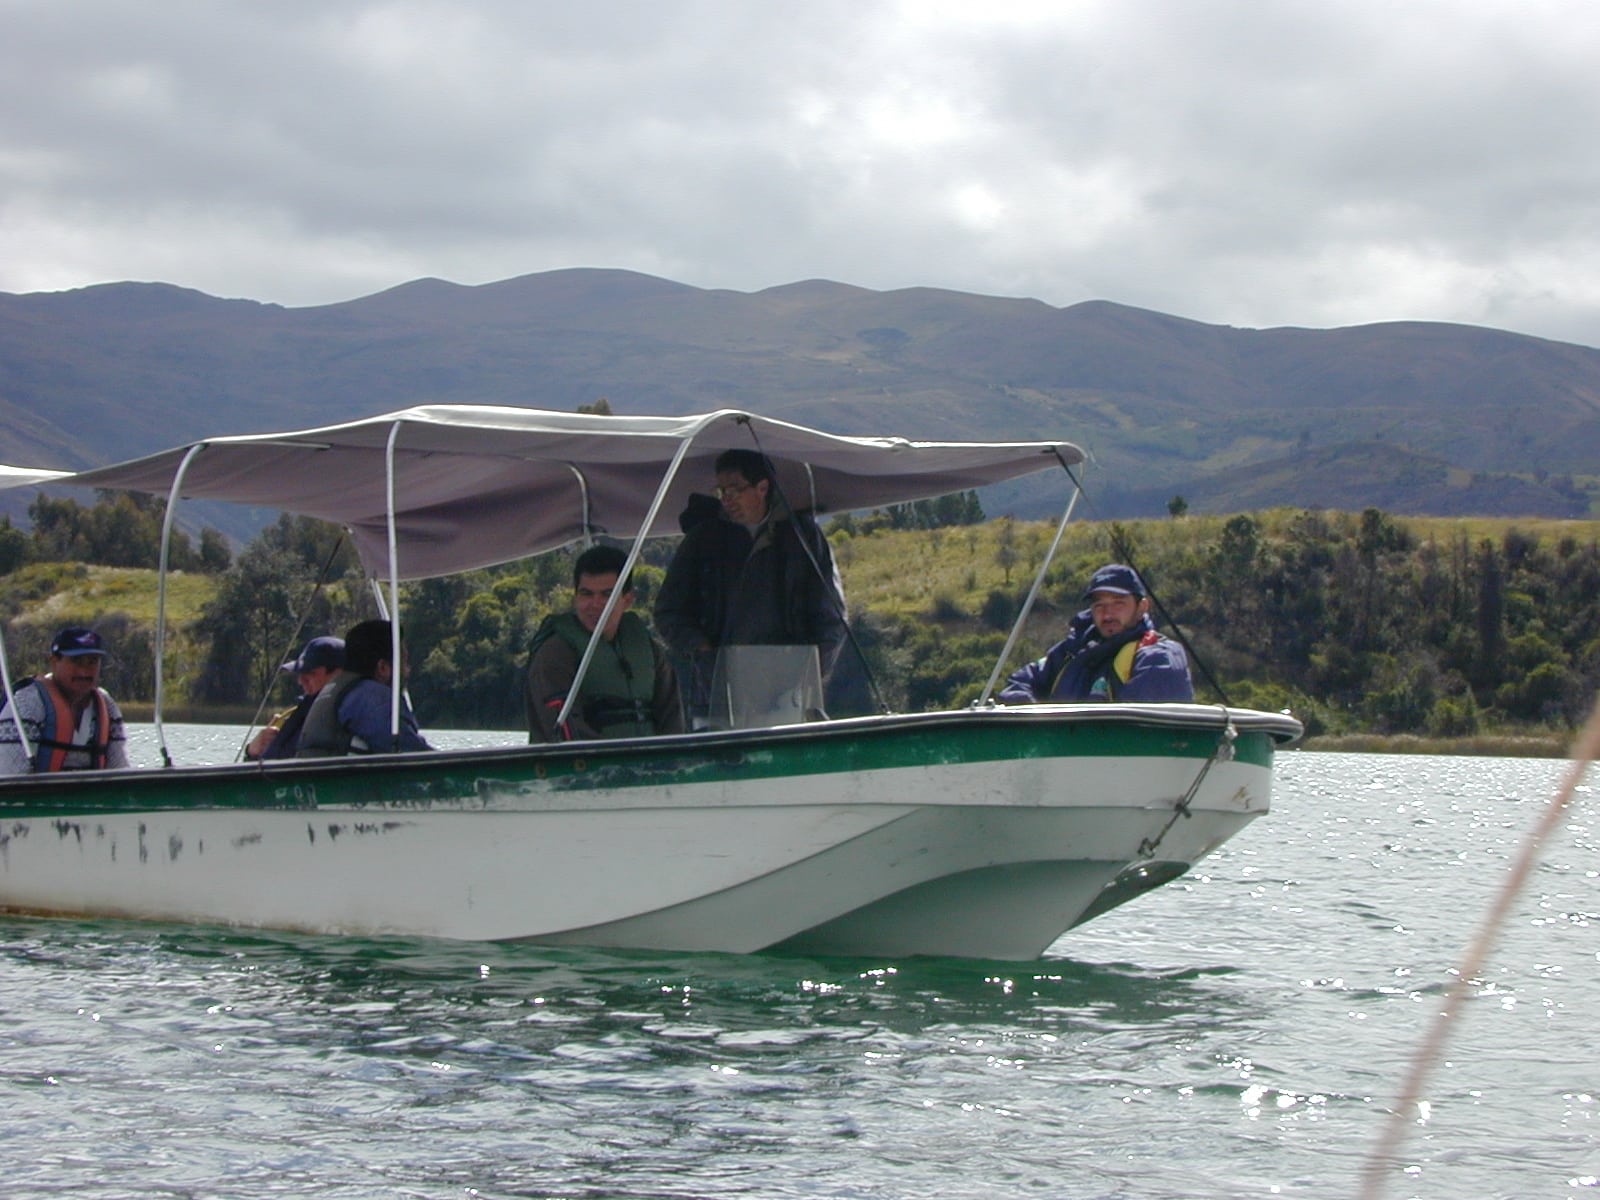 Five people sit on a covered boat in the water. Forests and mountains rise in the background.